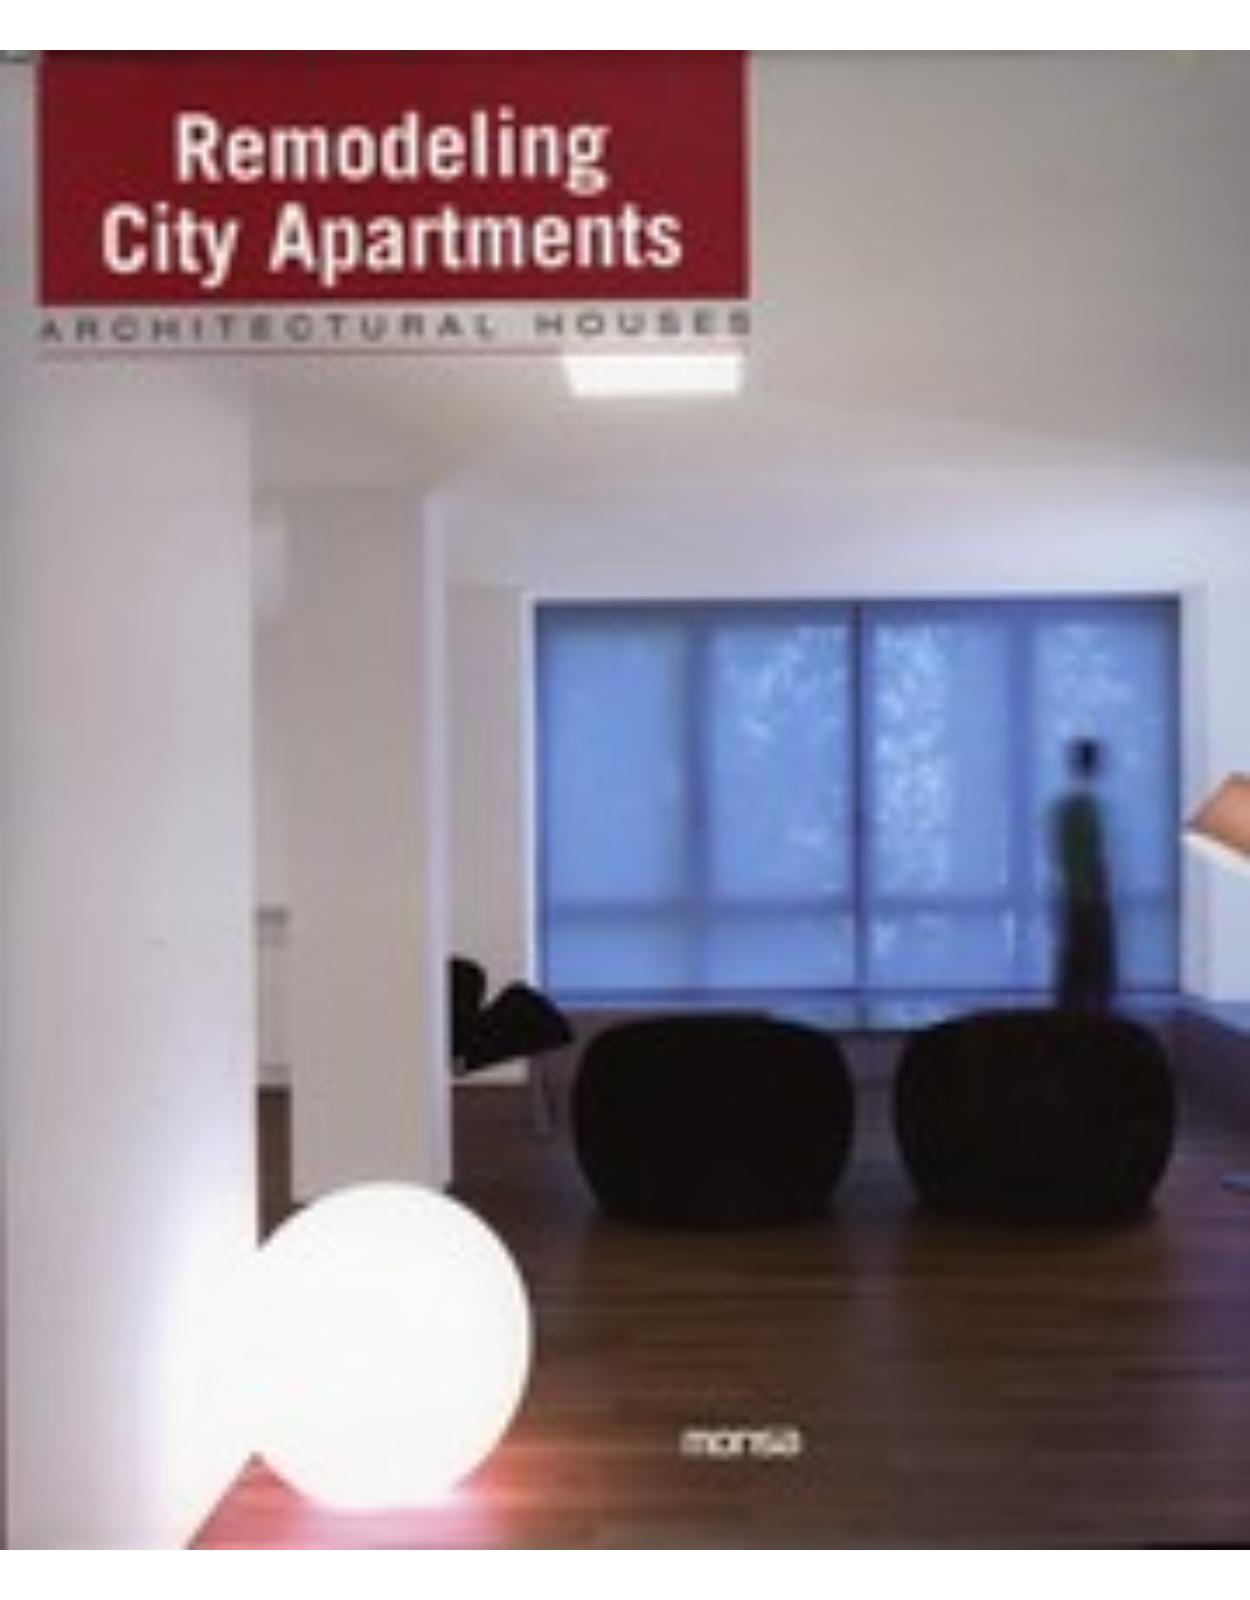 Remodeling City Apartments: Architectural Houses